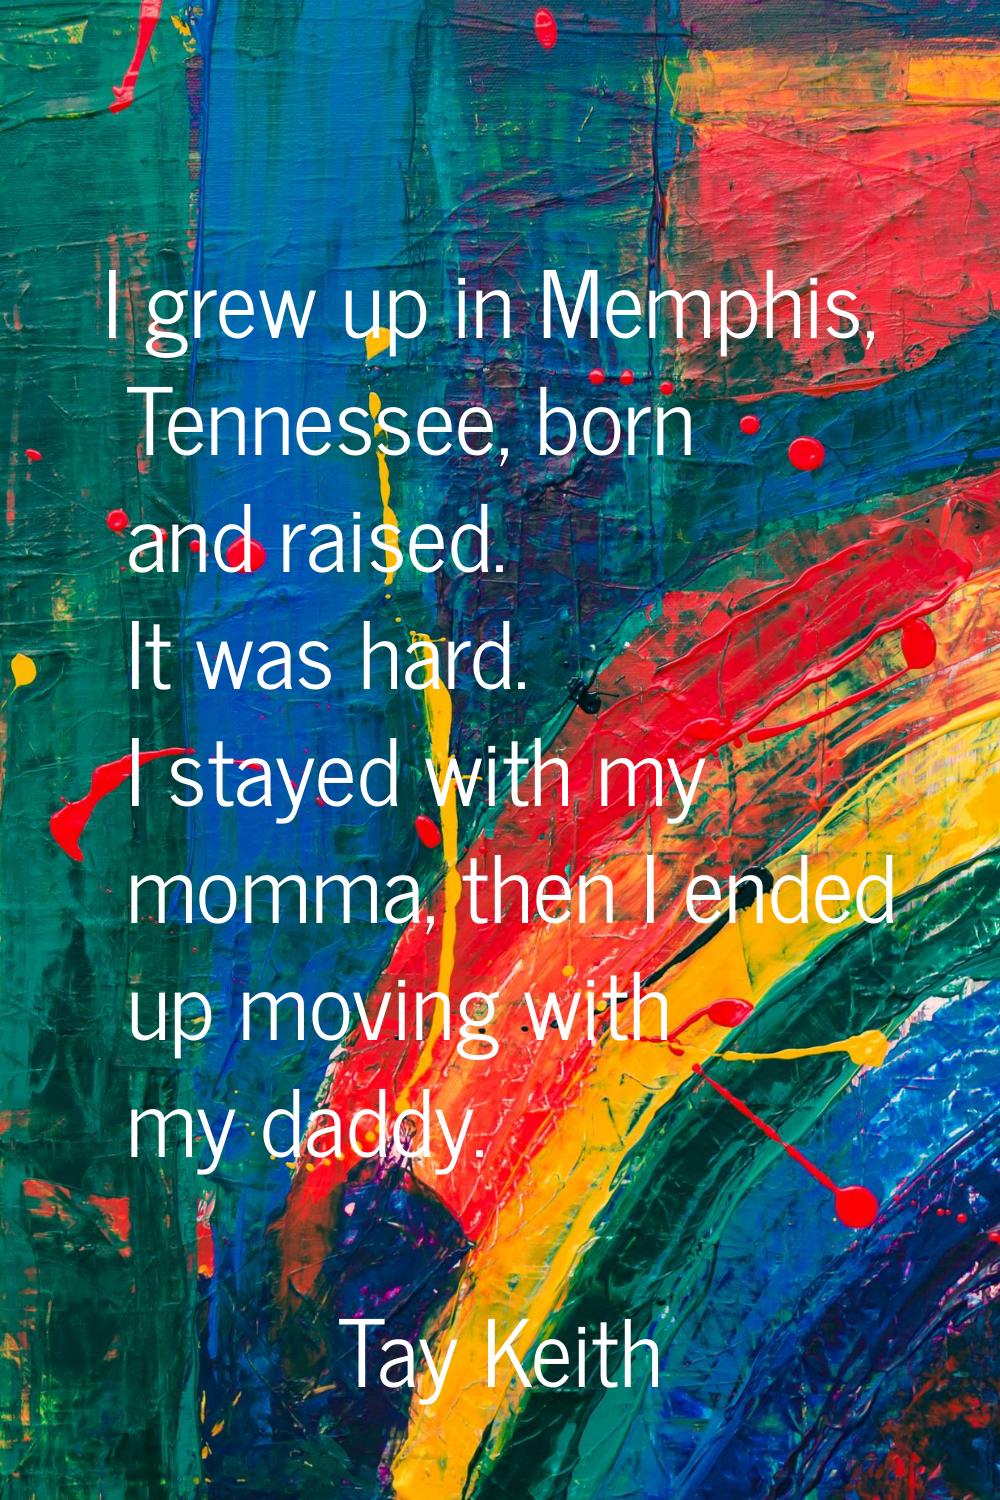 I grew up in Memphis, Tennessee, born and raised. It was hard. I stayed with my momma, then I ended